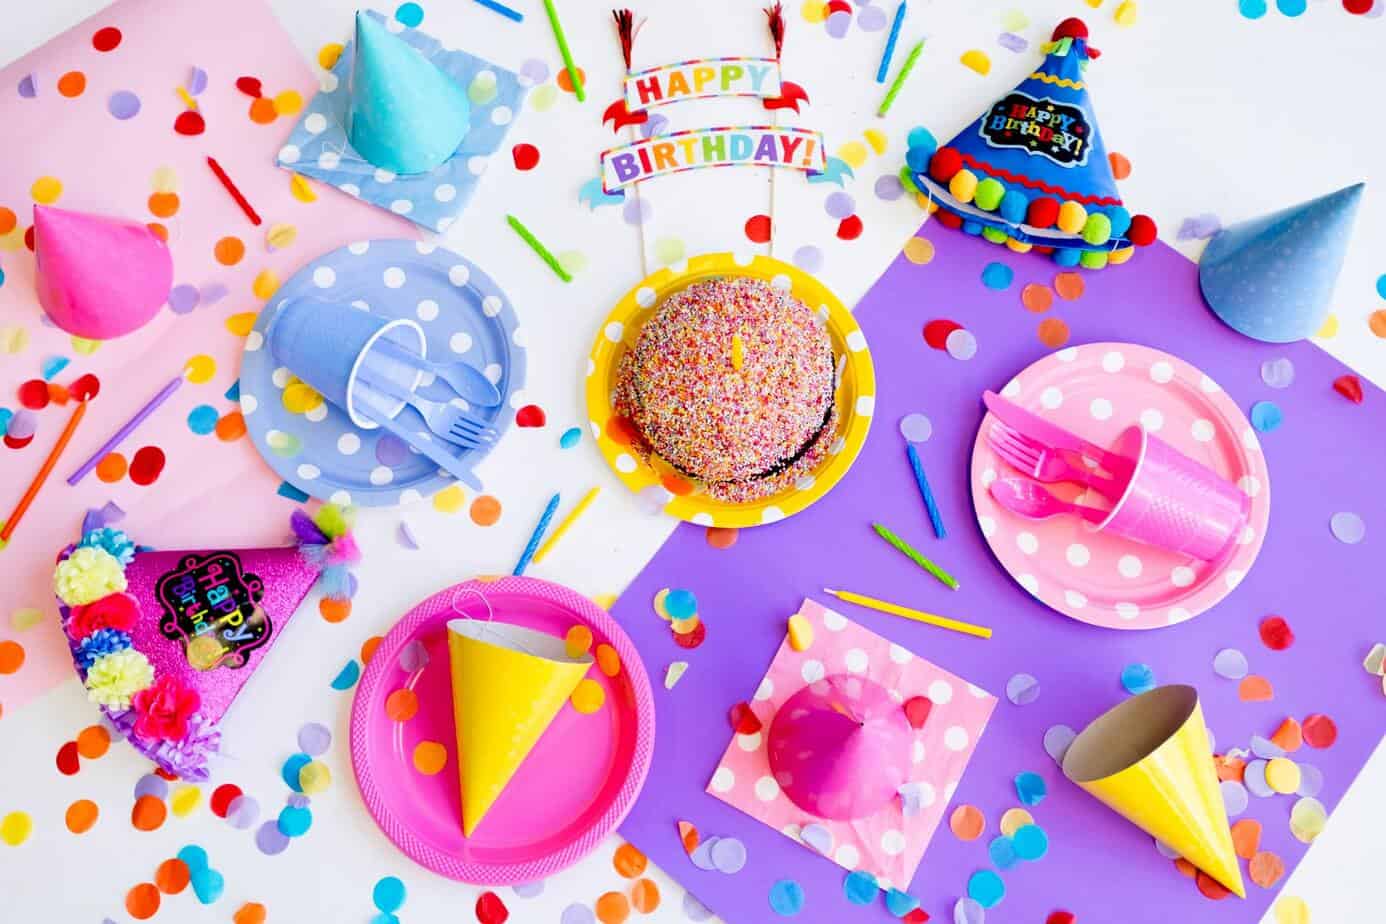 How to make a memorable birthday party?